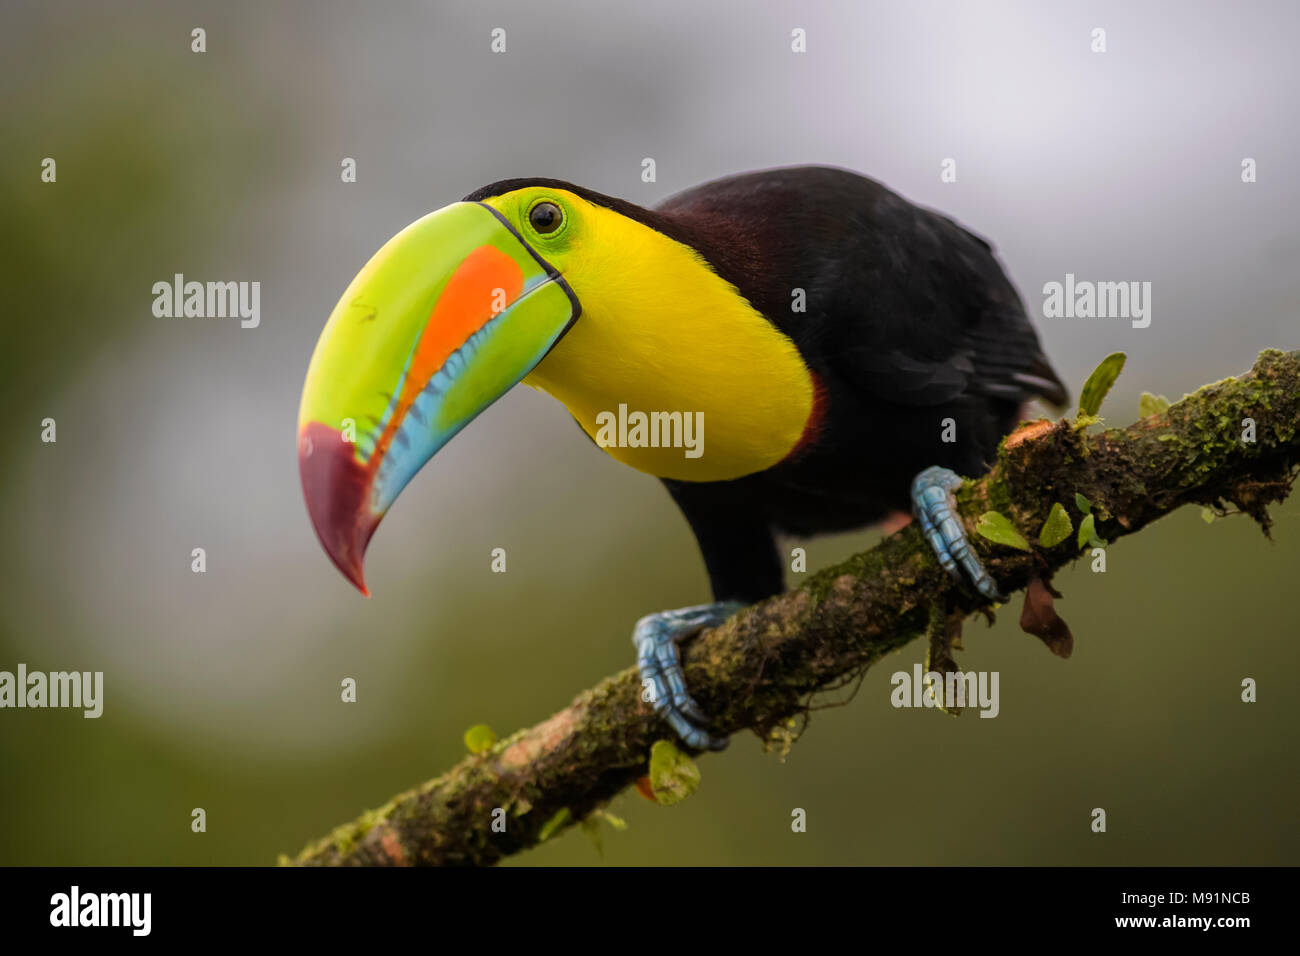 Keel-billed Toucan - Ramphastos sulfuratus, large colorful toucan from Costa Rica forest with very colored beak. Stock Photo